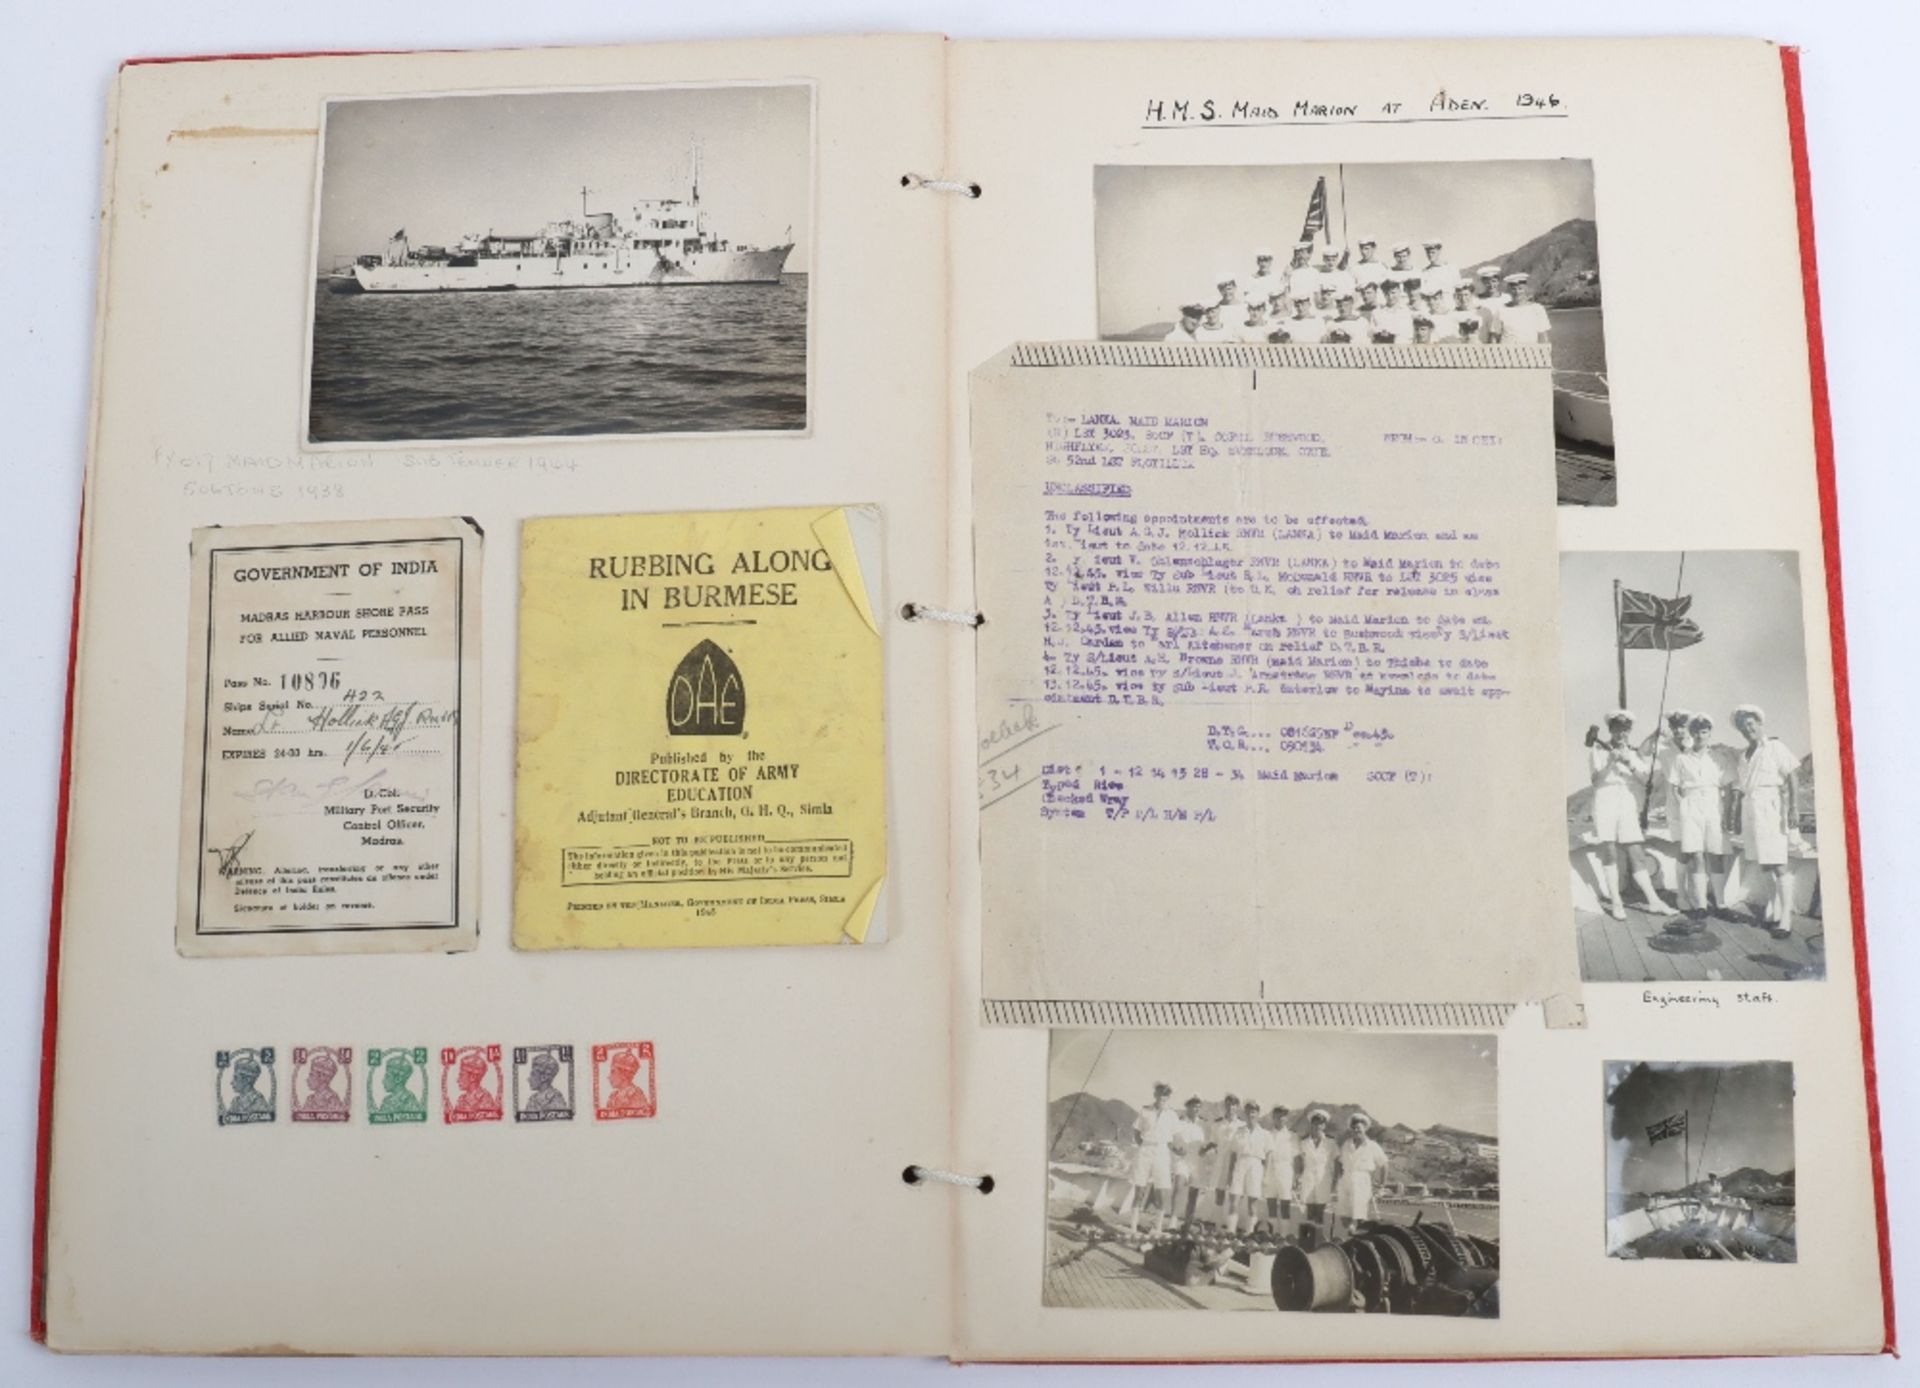 Historically Important and Very Interesting Archive With Fascinating Bismarck Sinking Content - Image 34 of 36